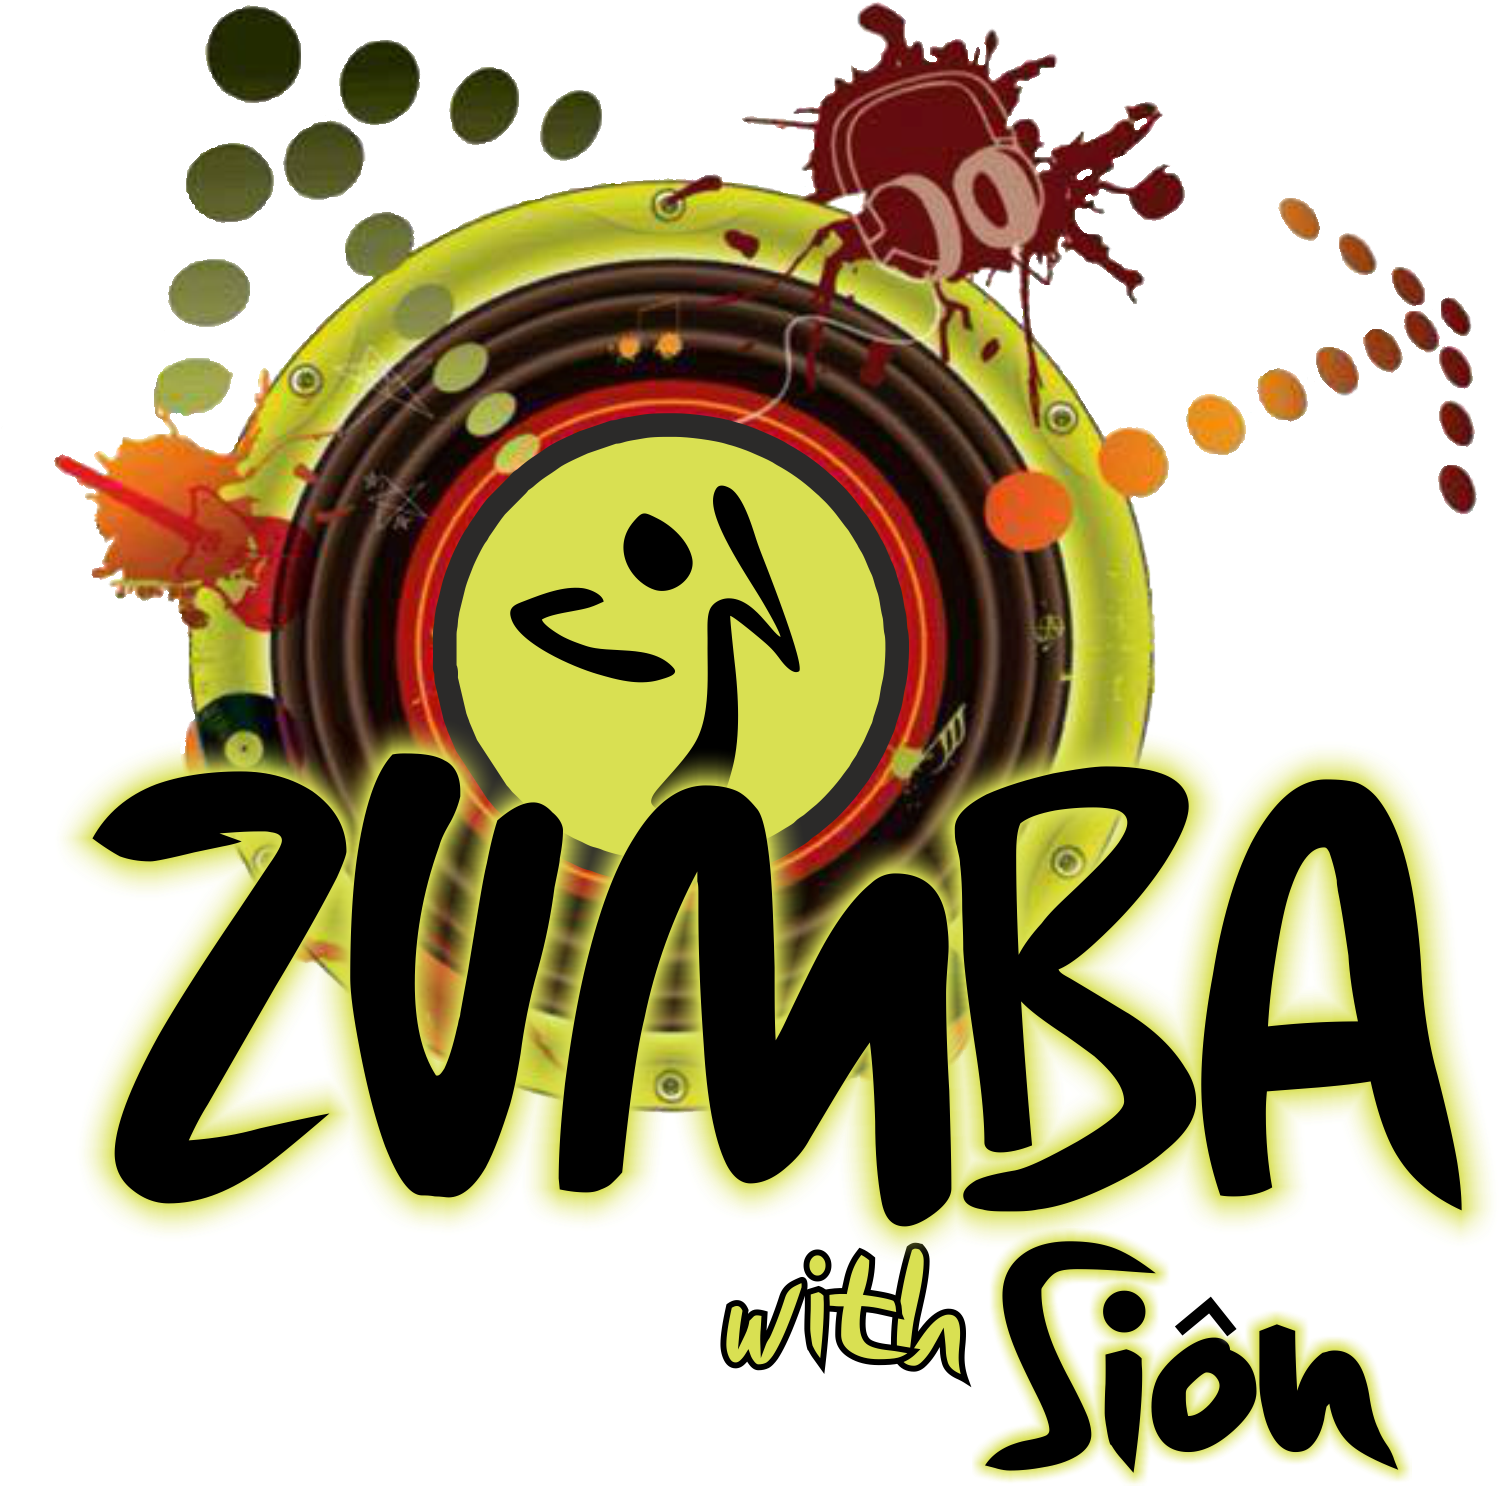 Tpts Fitness Club In Swansea Can Now Offer The Best - Zumba Fitness Png (1541x1530)